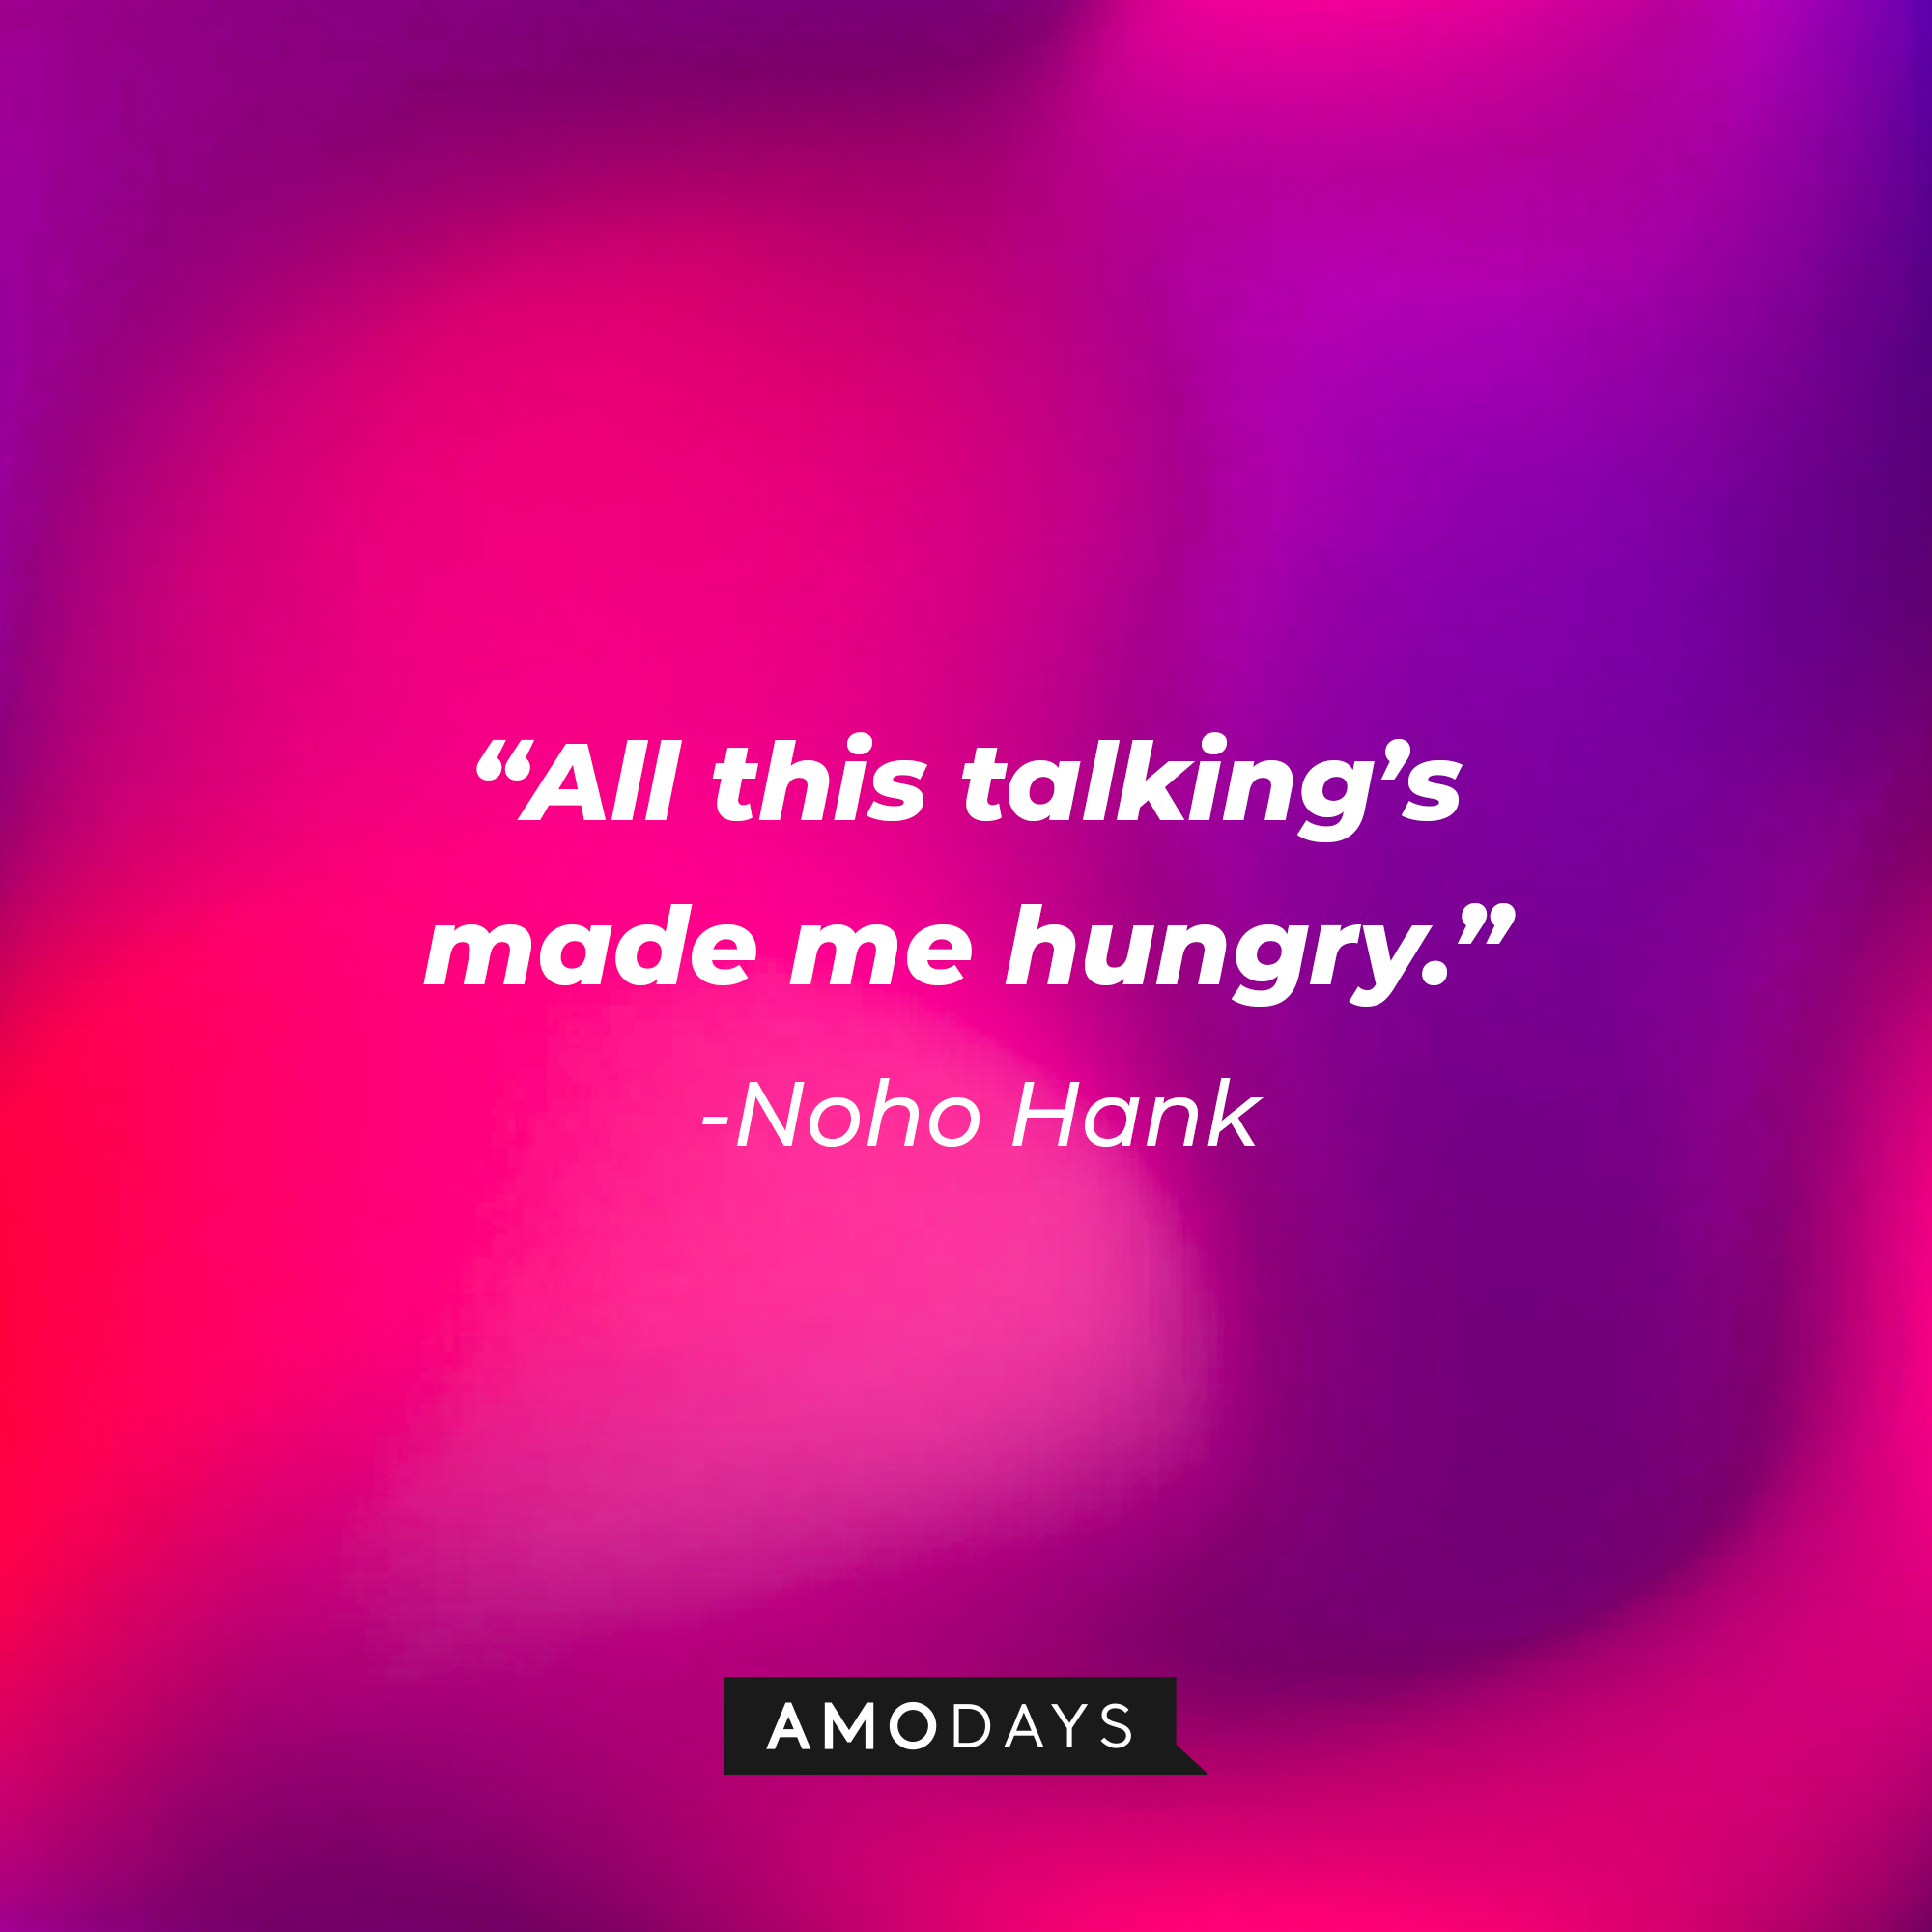 NoHo Hank, with his quote: “All this talking’s made me hungry.” | Source: AmoDays